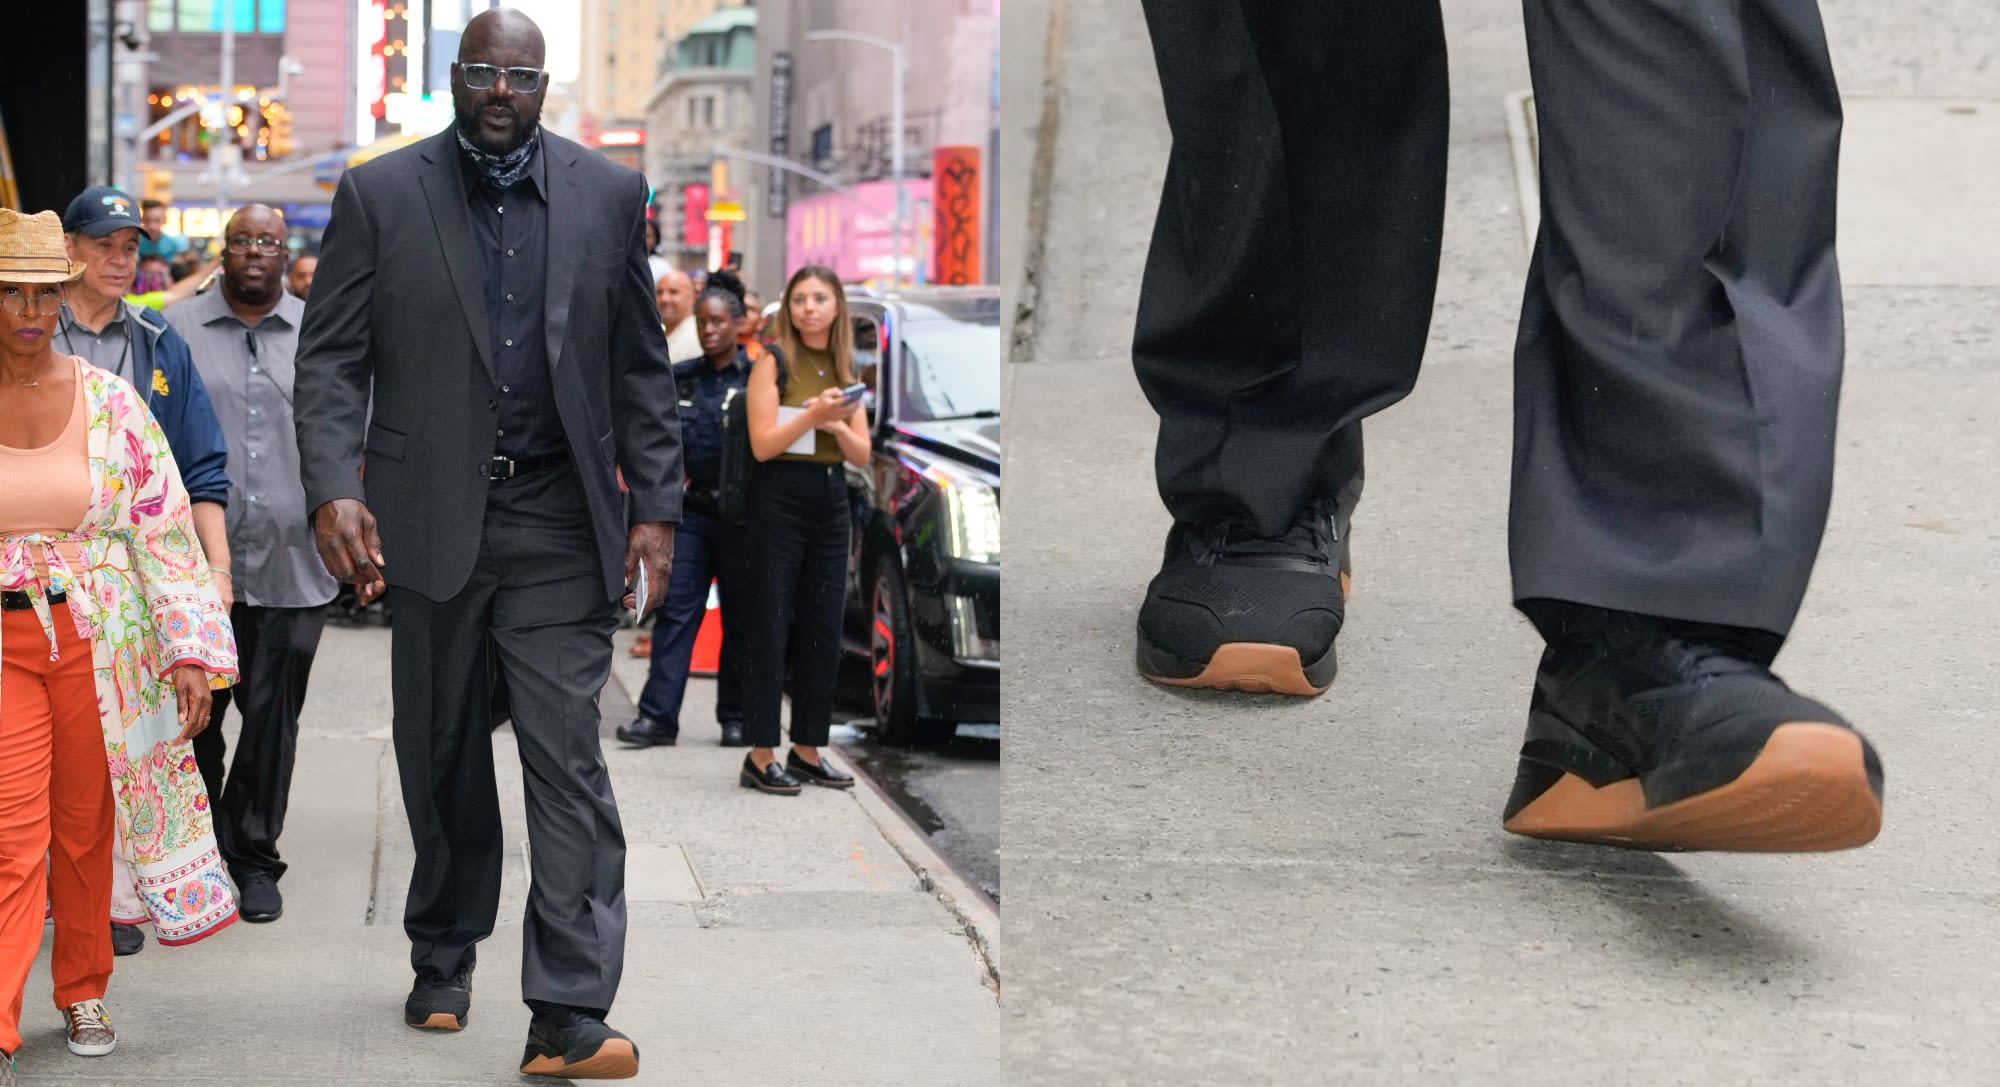 Shaquille O’Neal Models Reebok Sneakers in Power Suit on ‘Good Morning America’